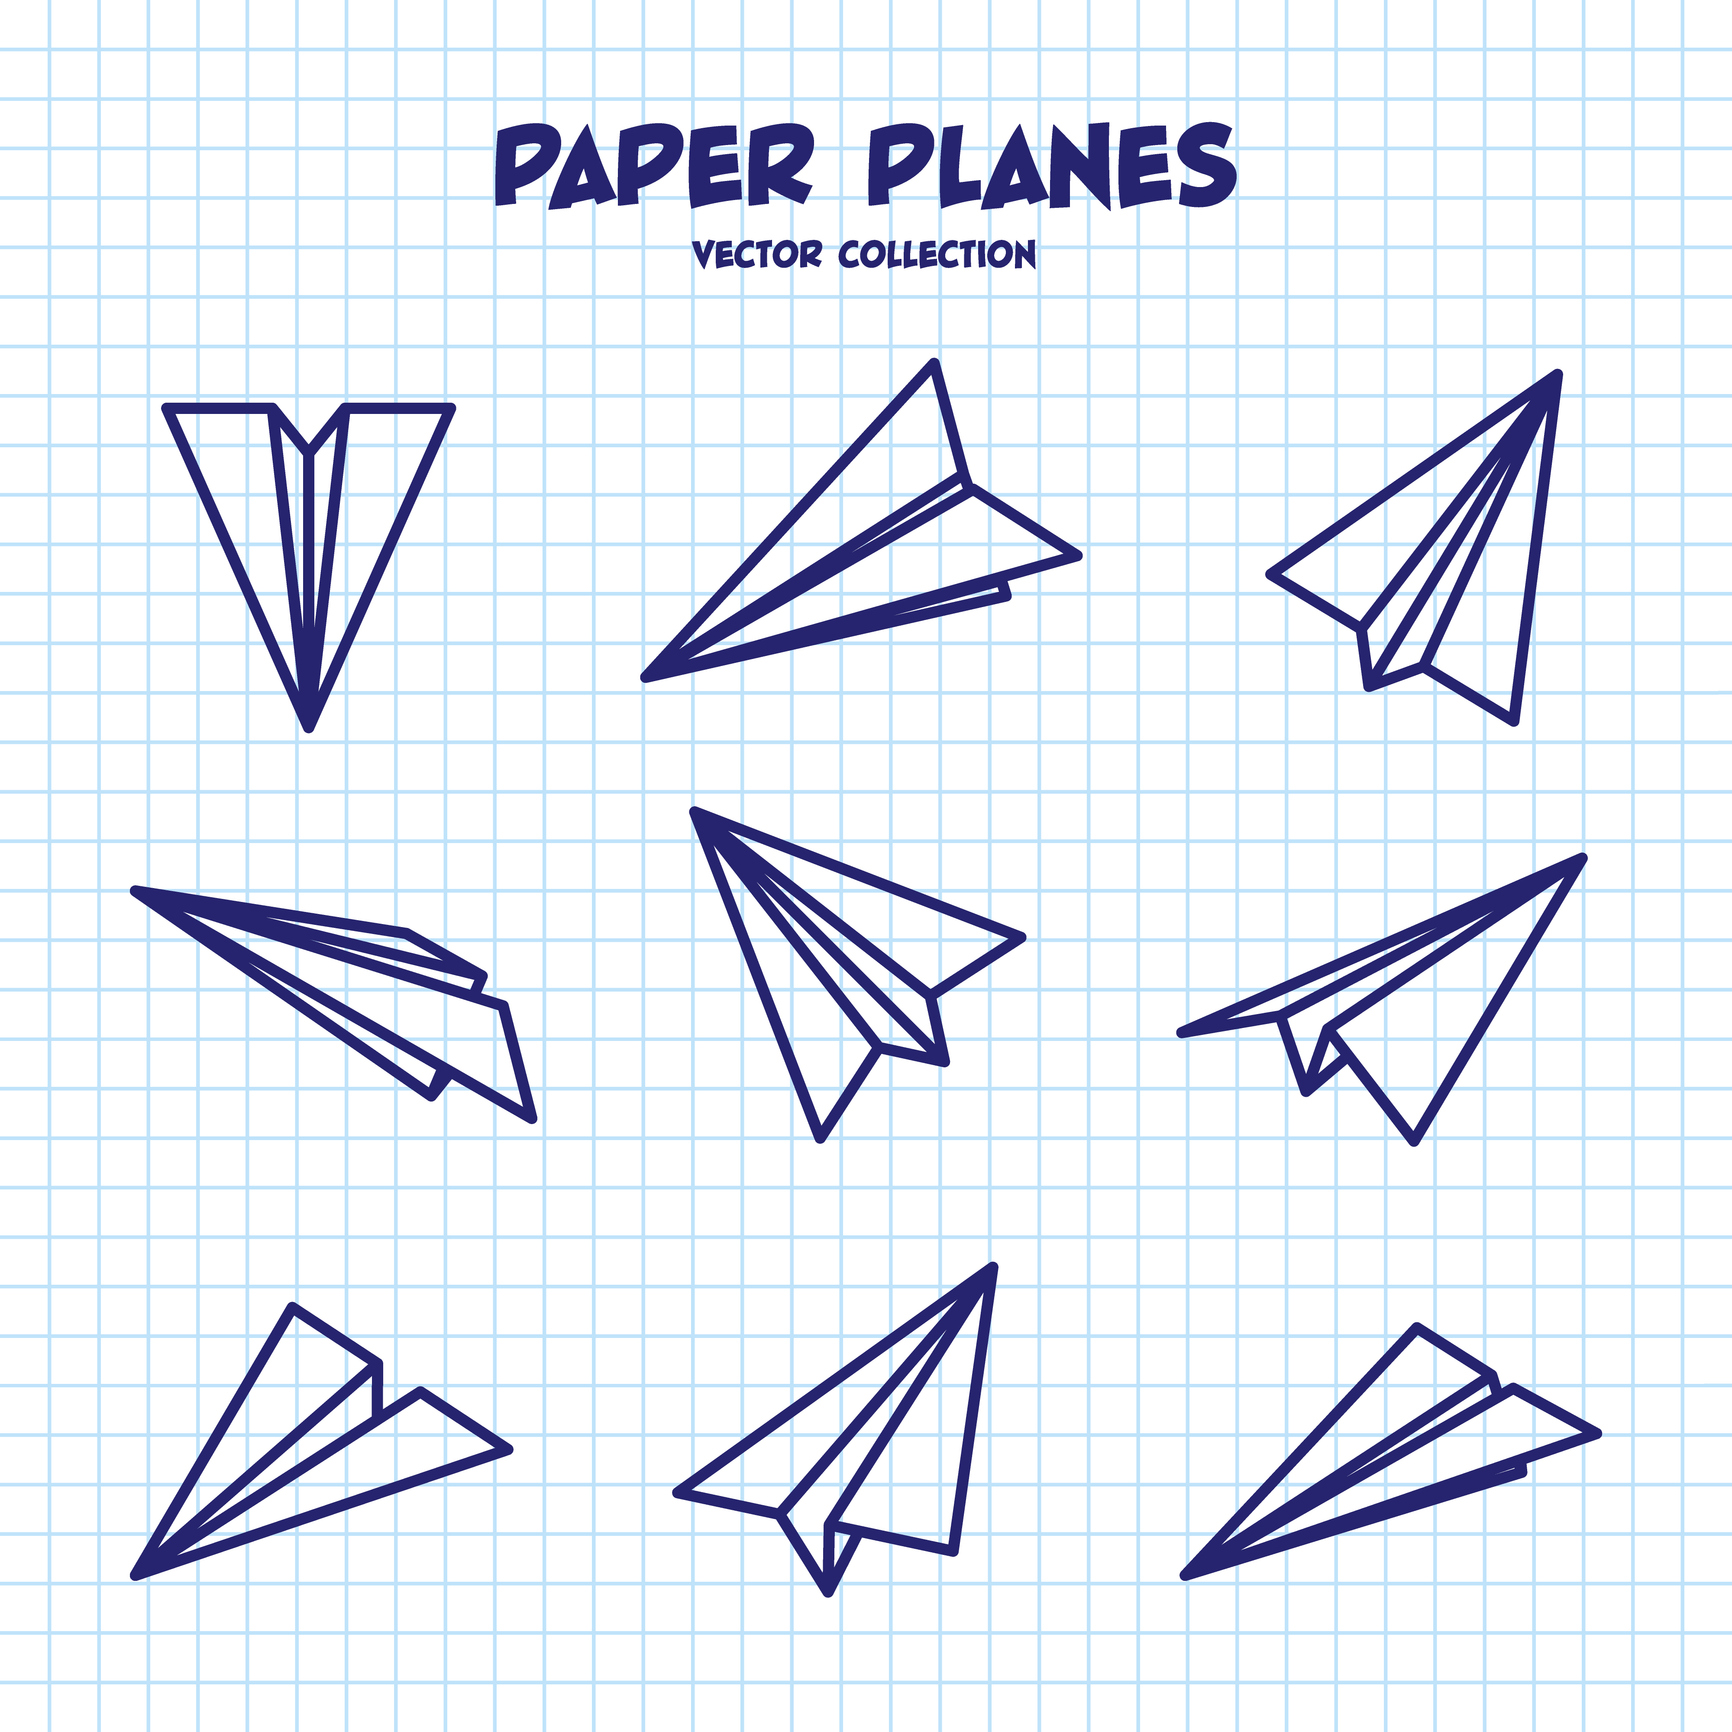 A drawing of paper planes on paper